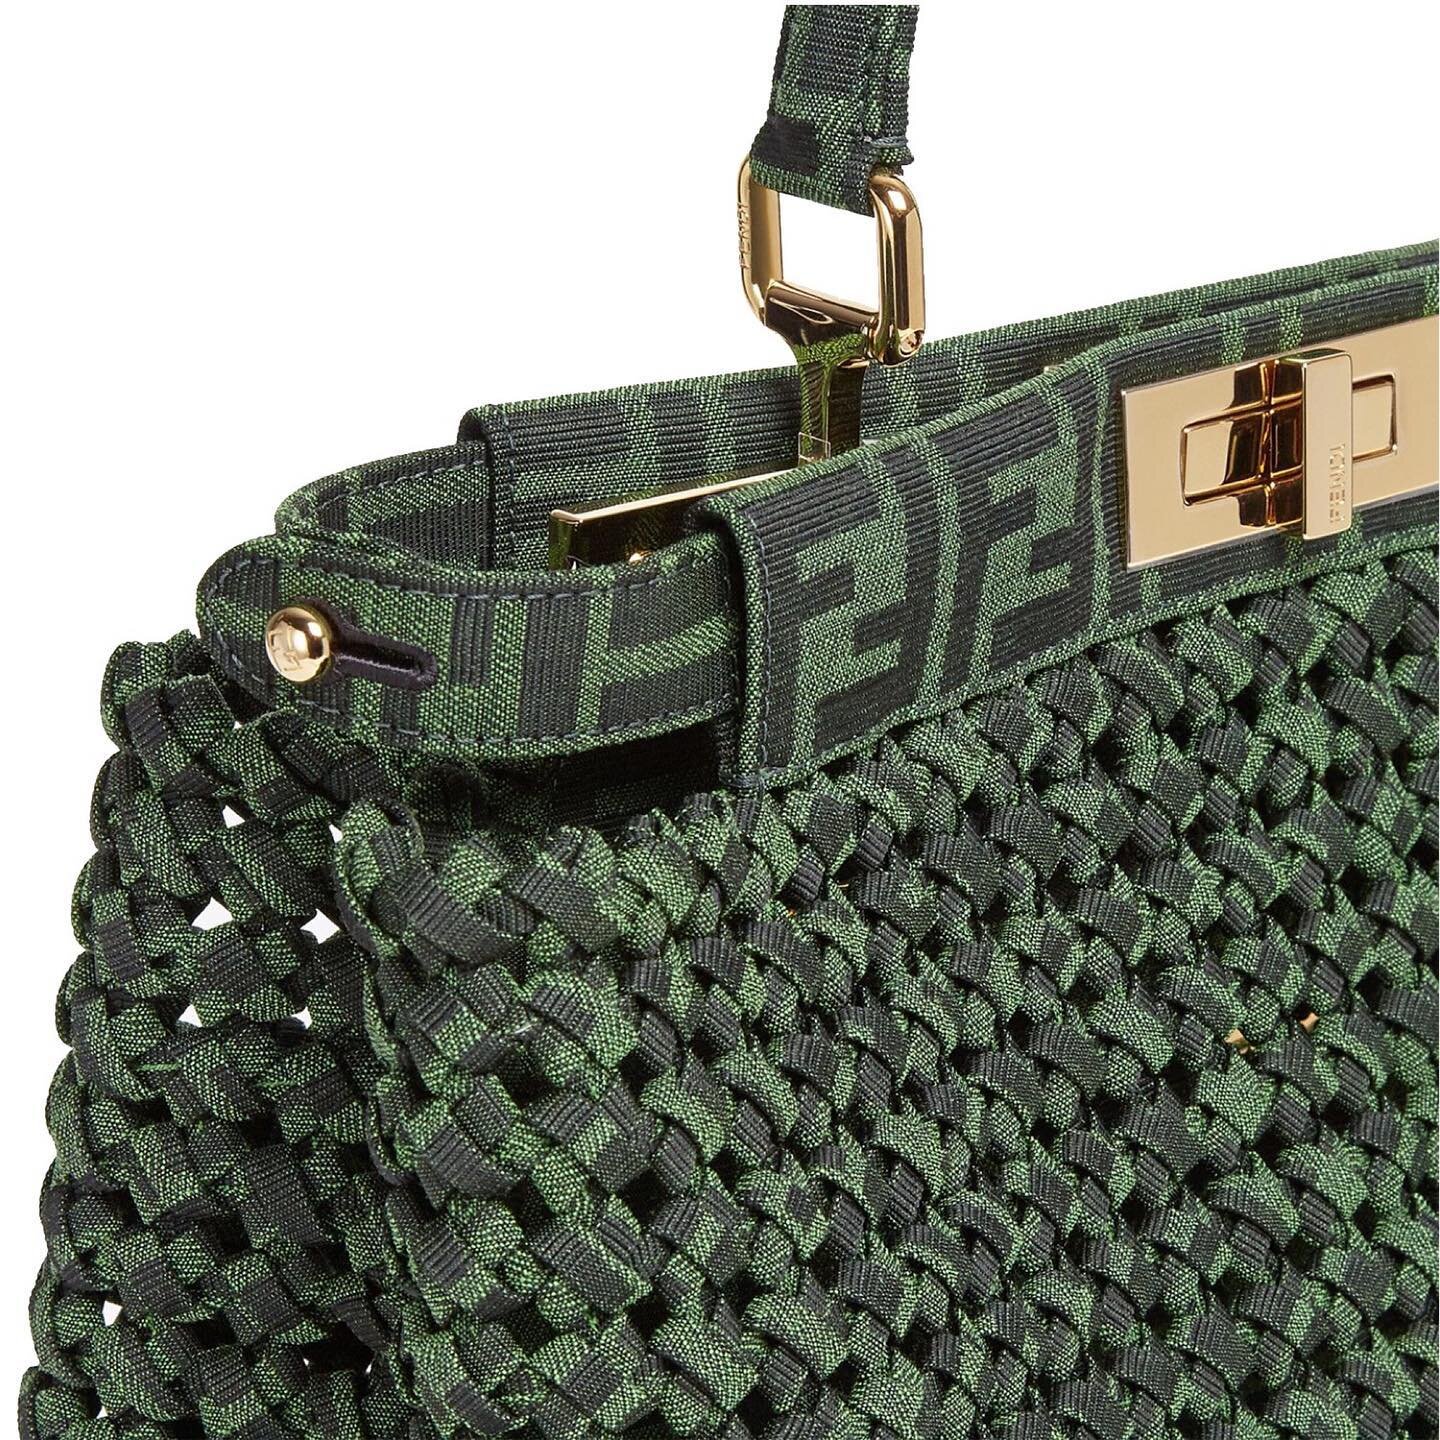 Fendi is the latest luxury brand to release a small capsule of animal-free handbags. They come at high prices but it's encouraging to continue to see global fashion houses adding cruelty-free products to their collections. Also how beautiful are the 